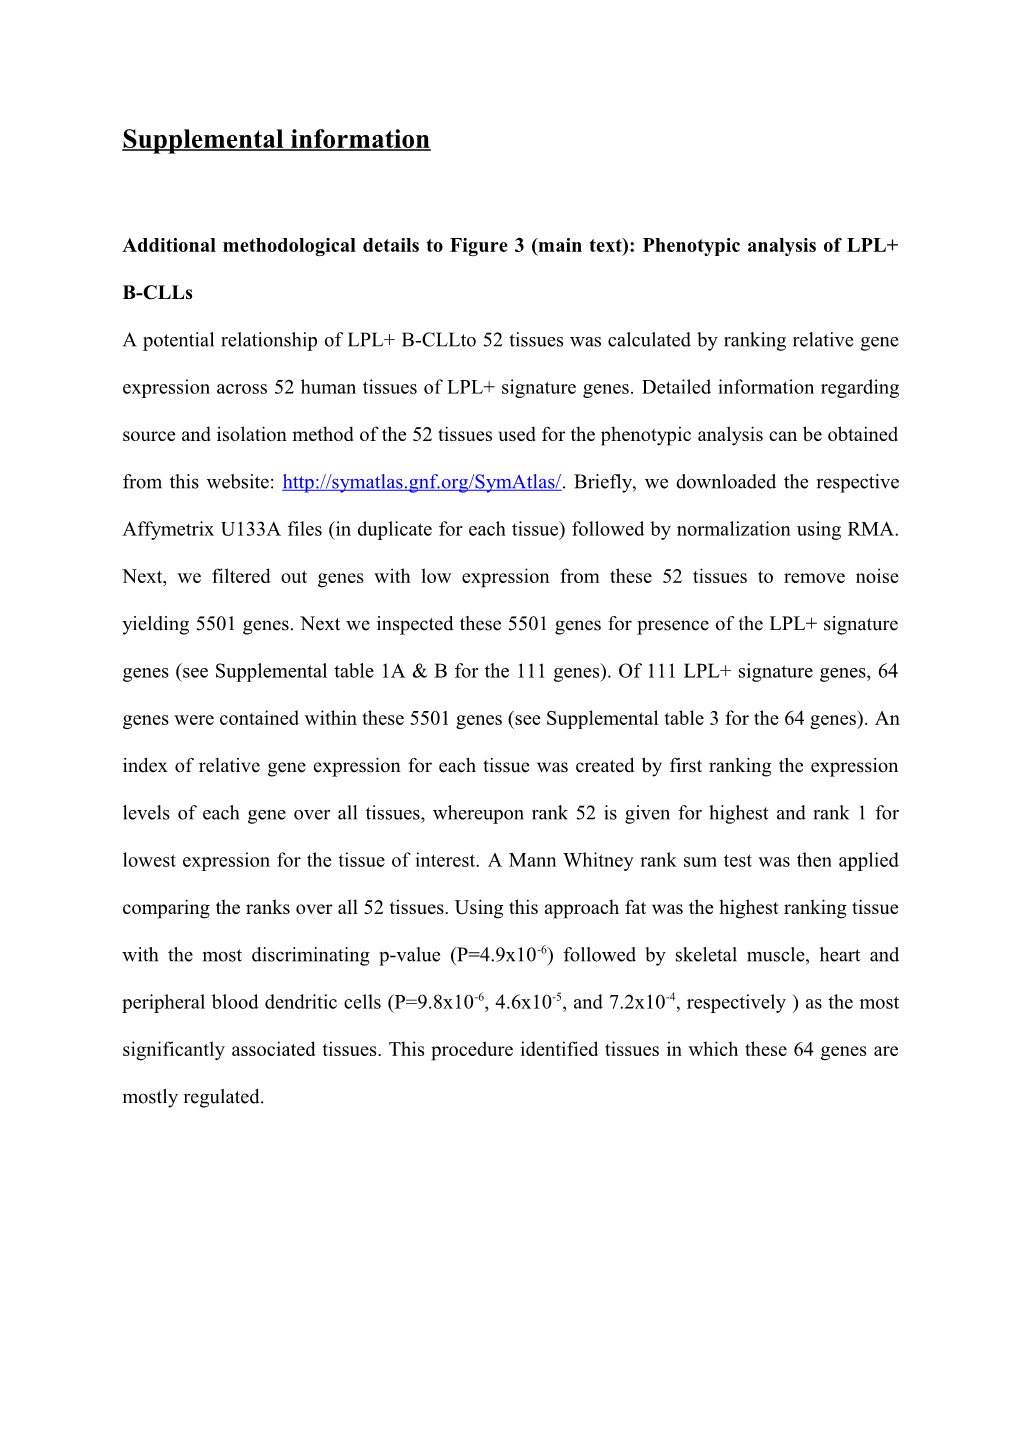 Additional Methodological Details to Figure 3 (Main Text): Phenotypic Analysis of LPL+ B-Clls